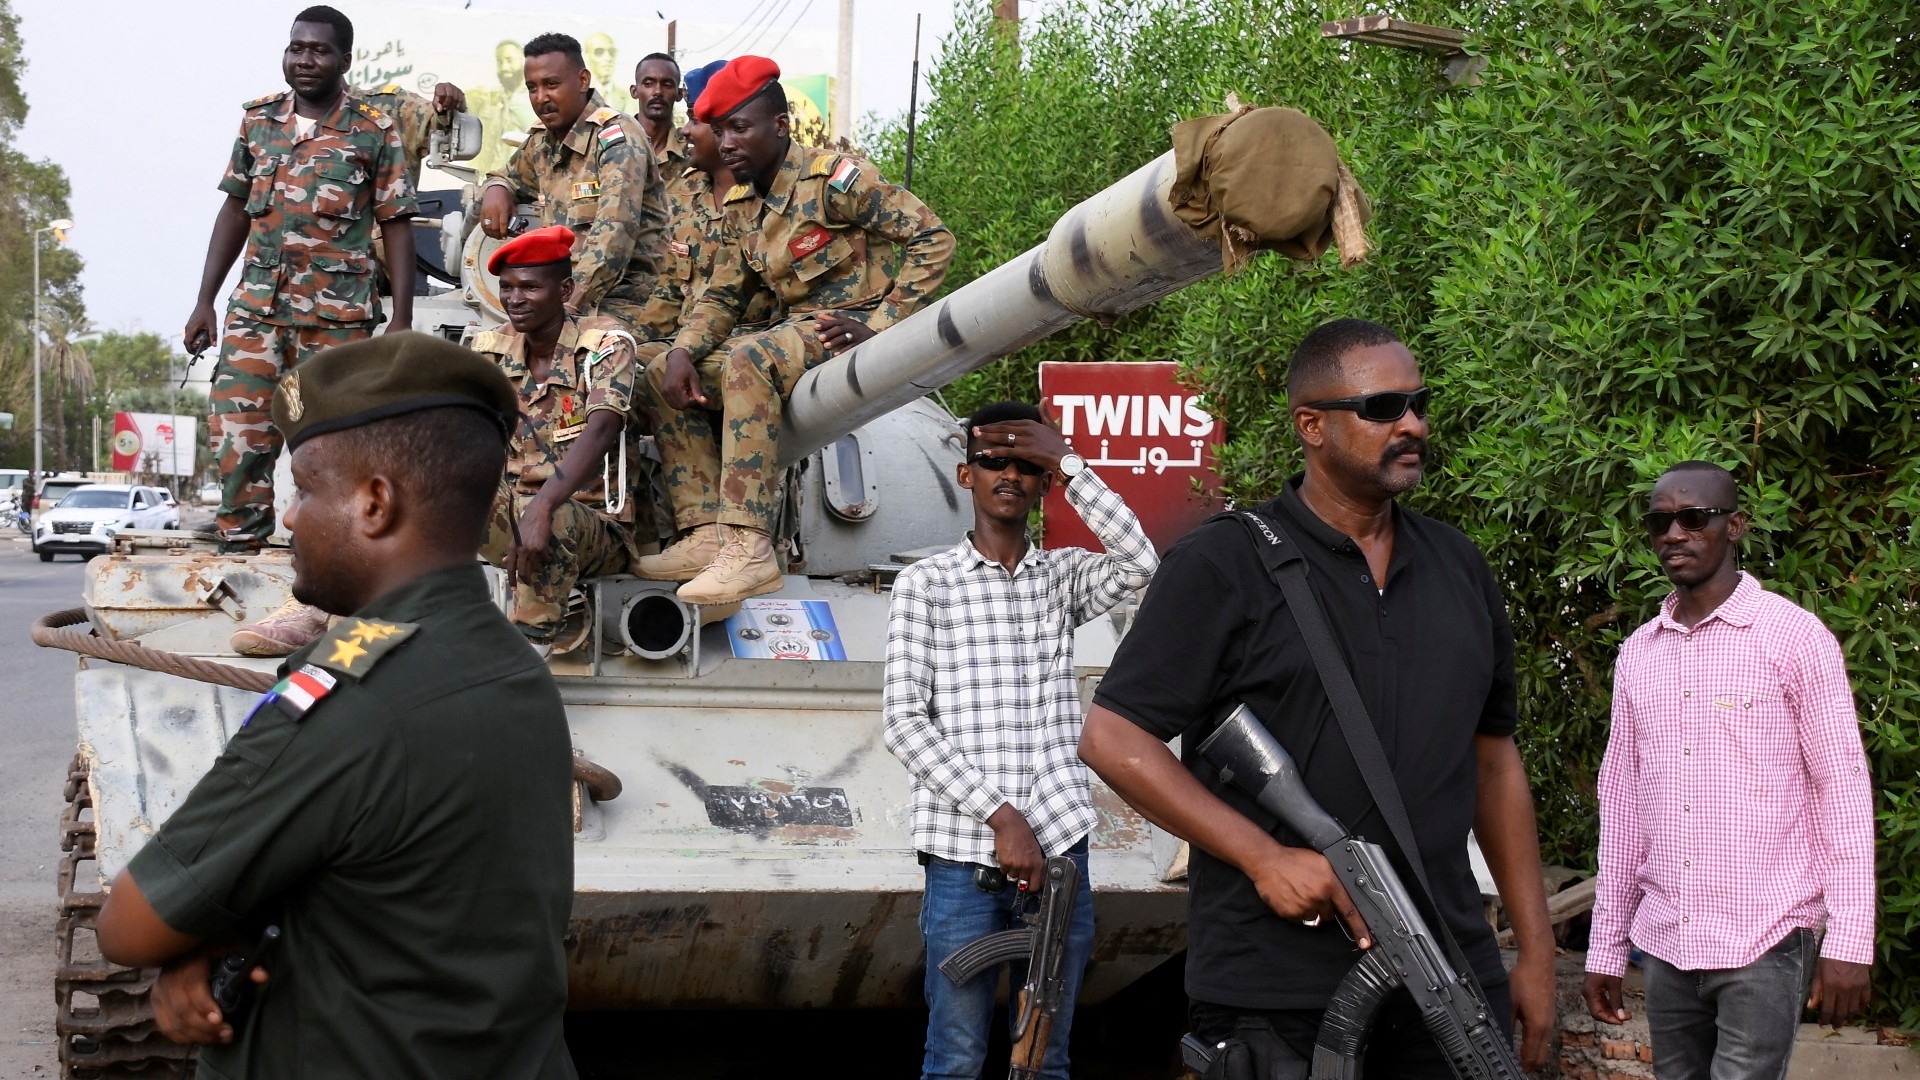 Members of military armed guard and members in plainclothes are seen around a tank after the arrival of Sudan's General Abdel Fattah al-Burhan in the military airport of Port Sudan on 27 August (Reuters)